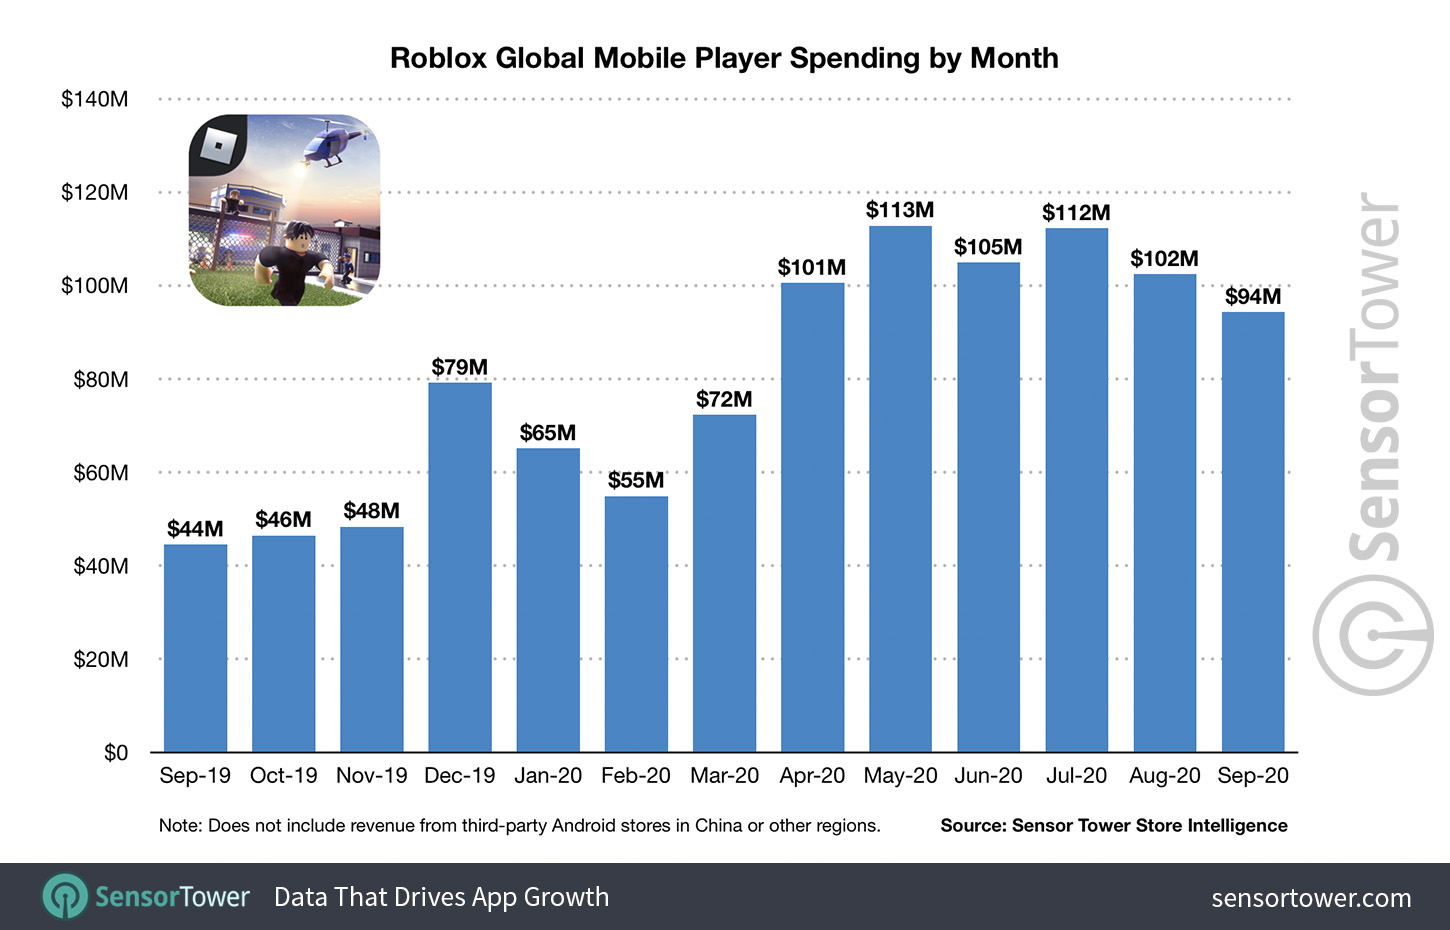 Roblox Global Mobile Player Spending by Month September 2019 to September 2020